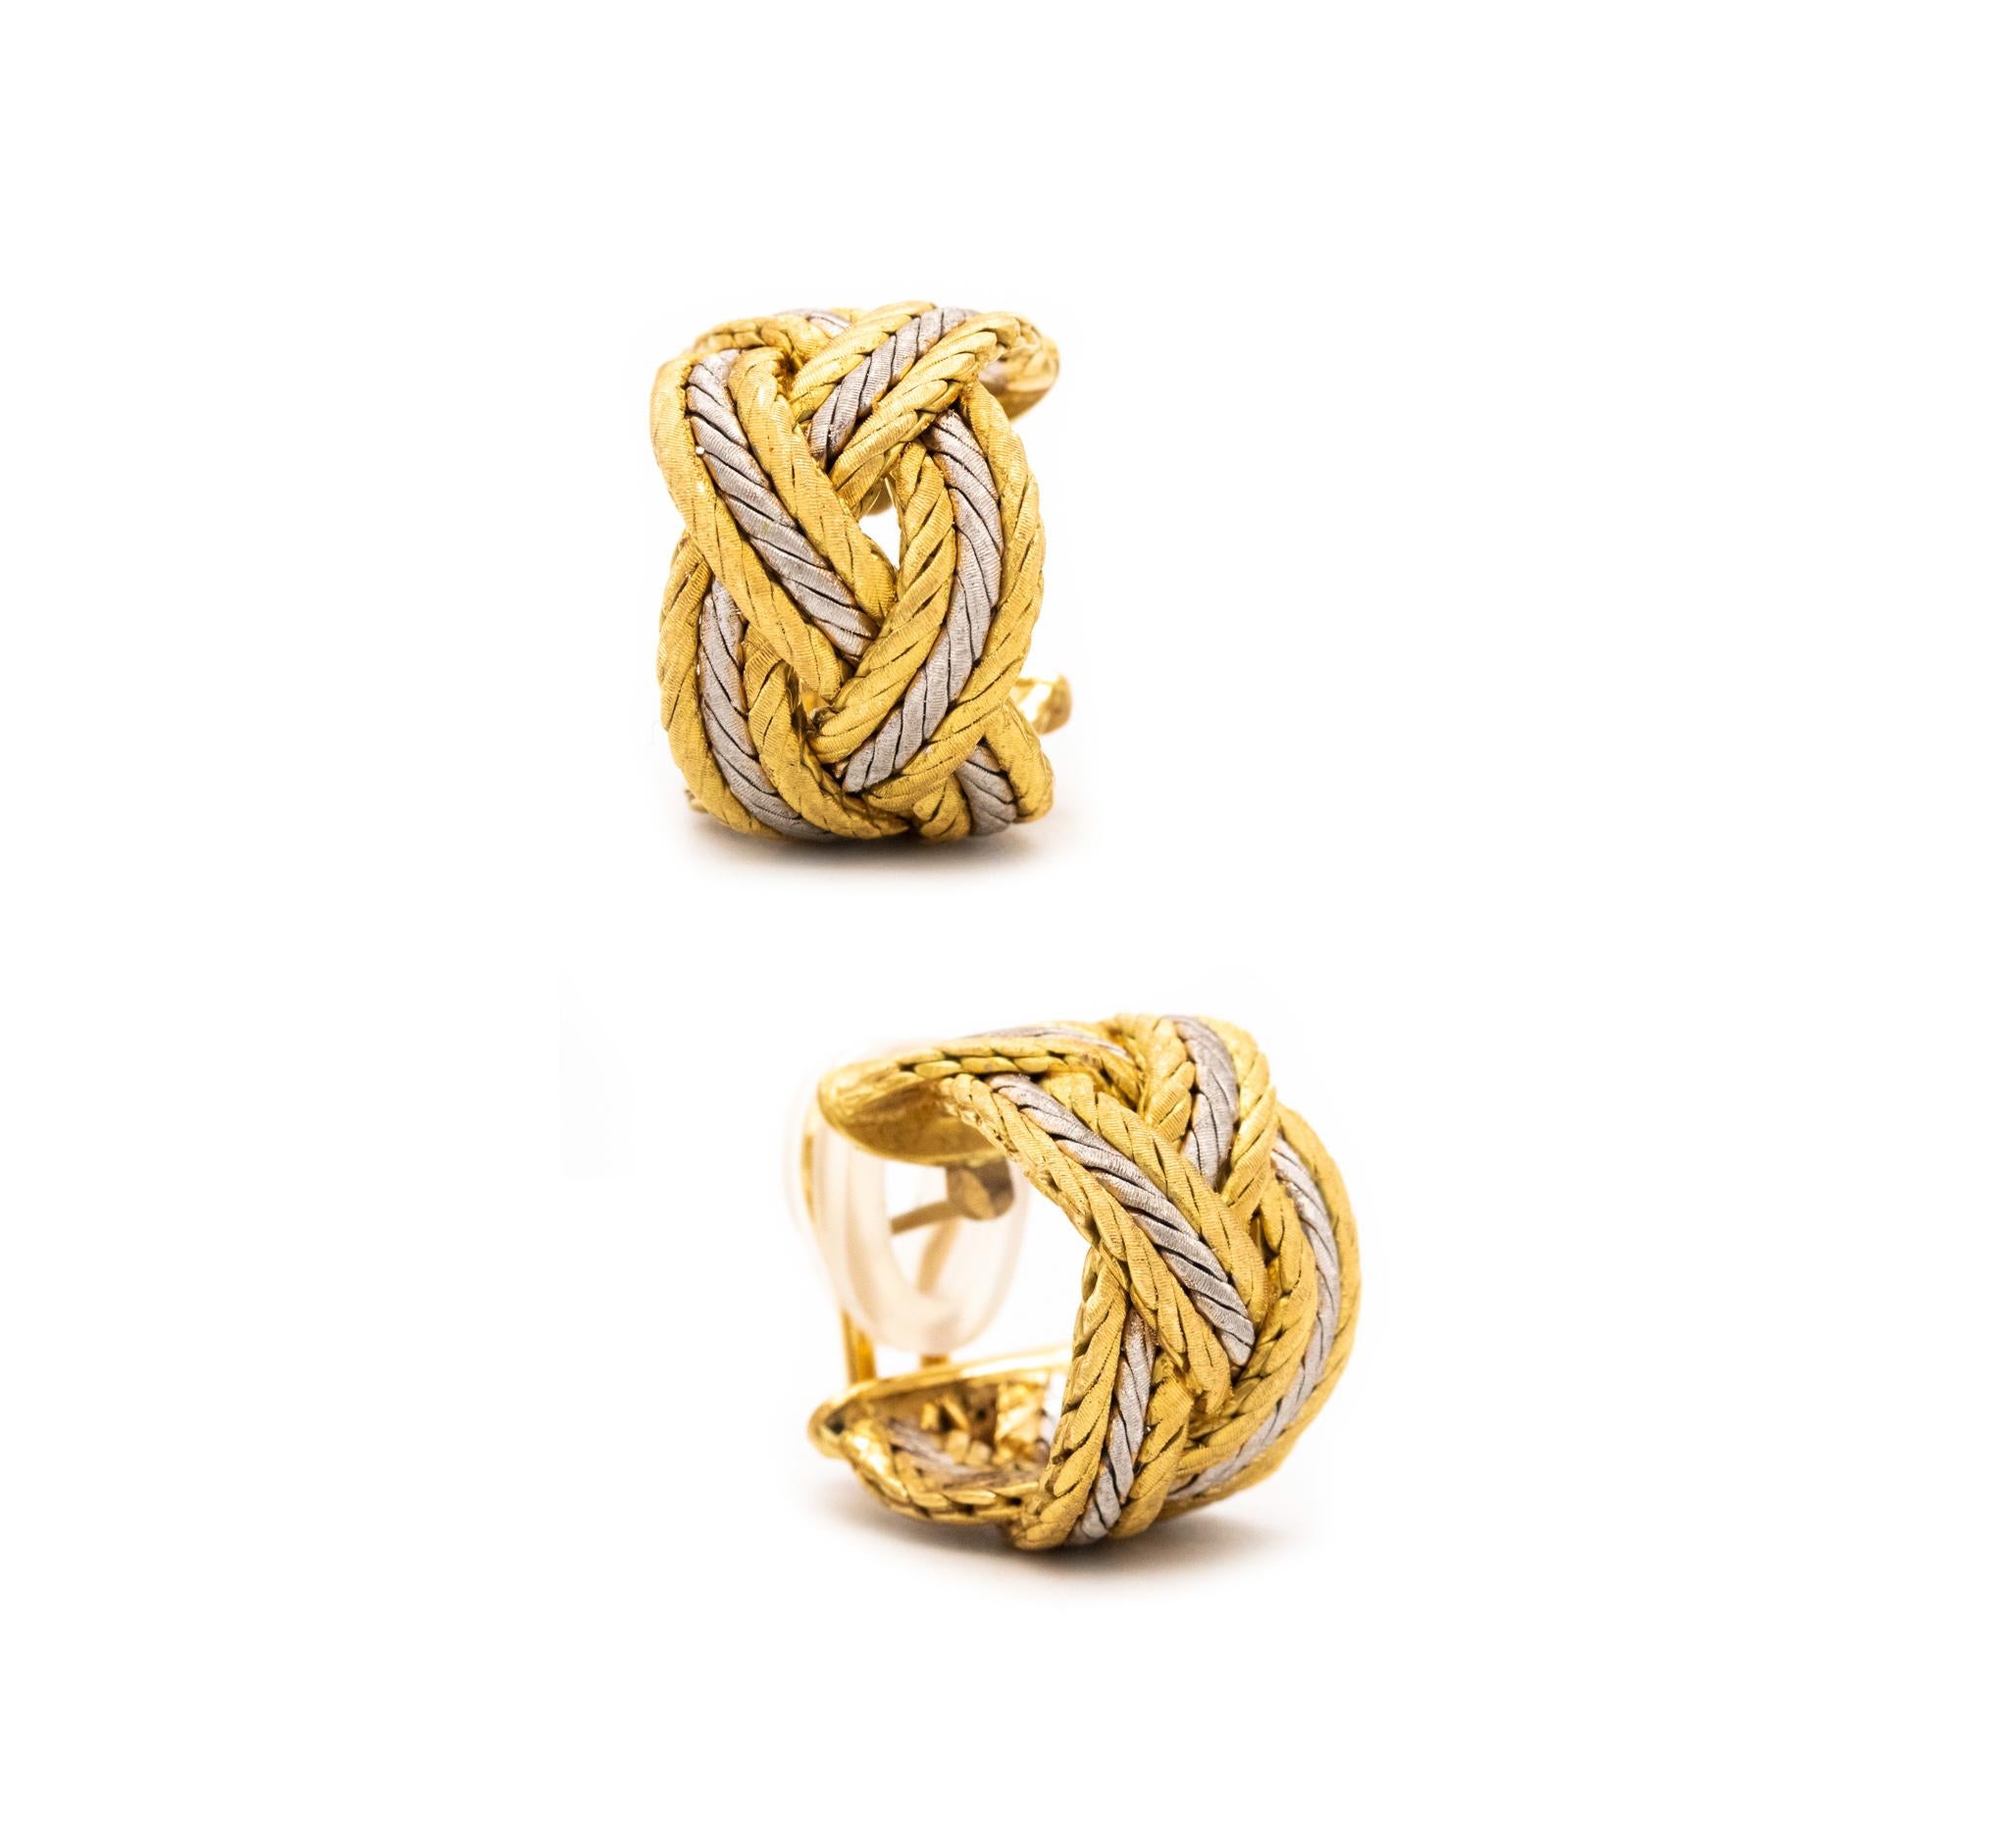 Modernist Buccellati Milano Large Hoops Earrings in Woven Textured 18Kt Yellow White Gold